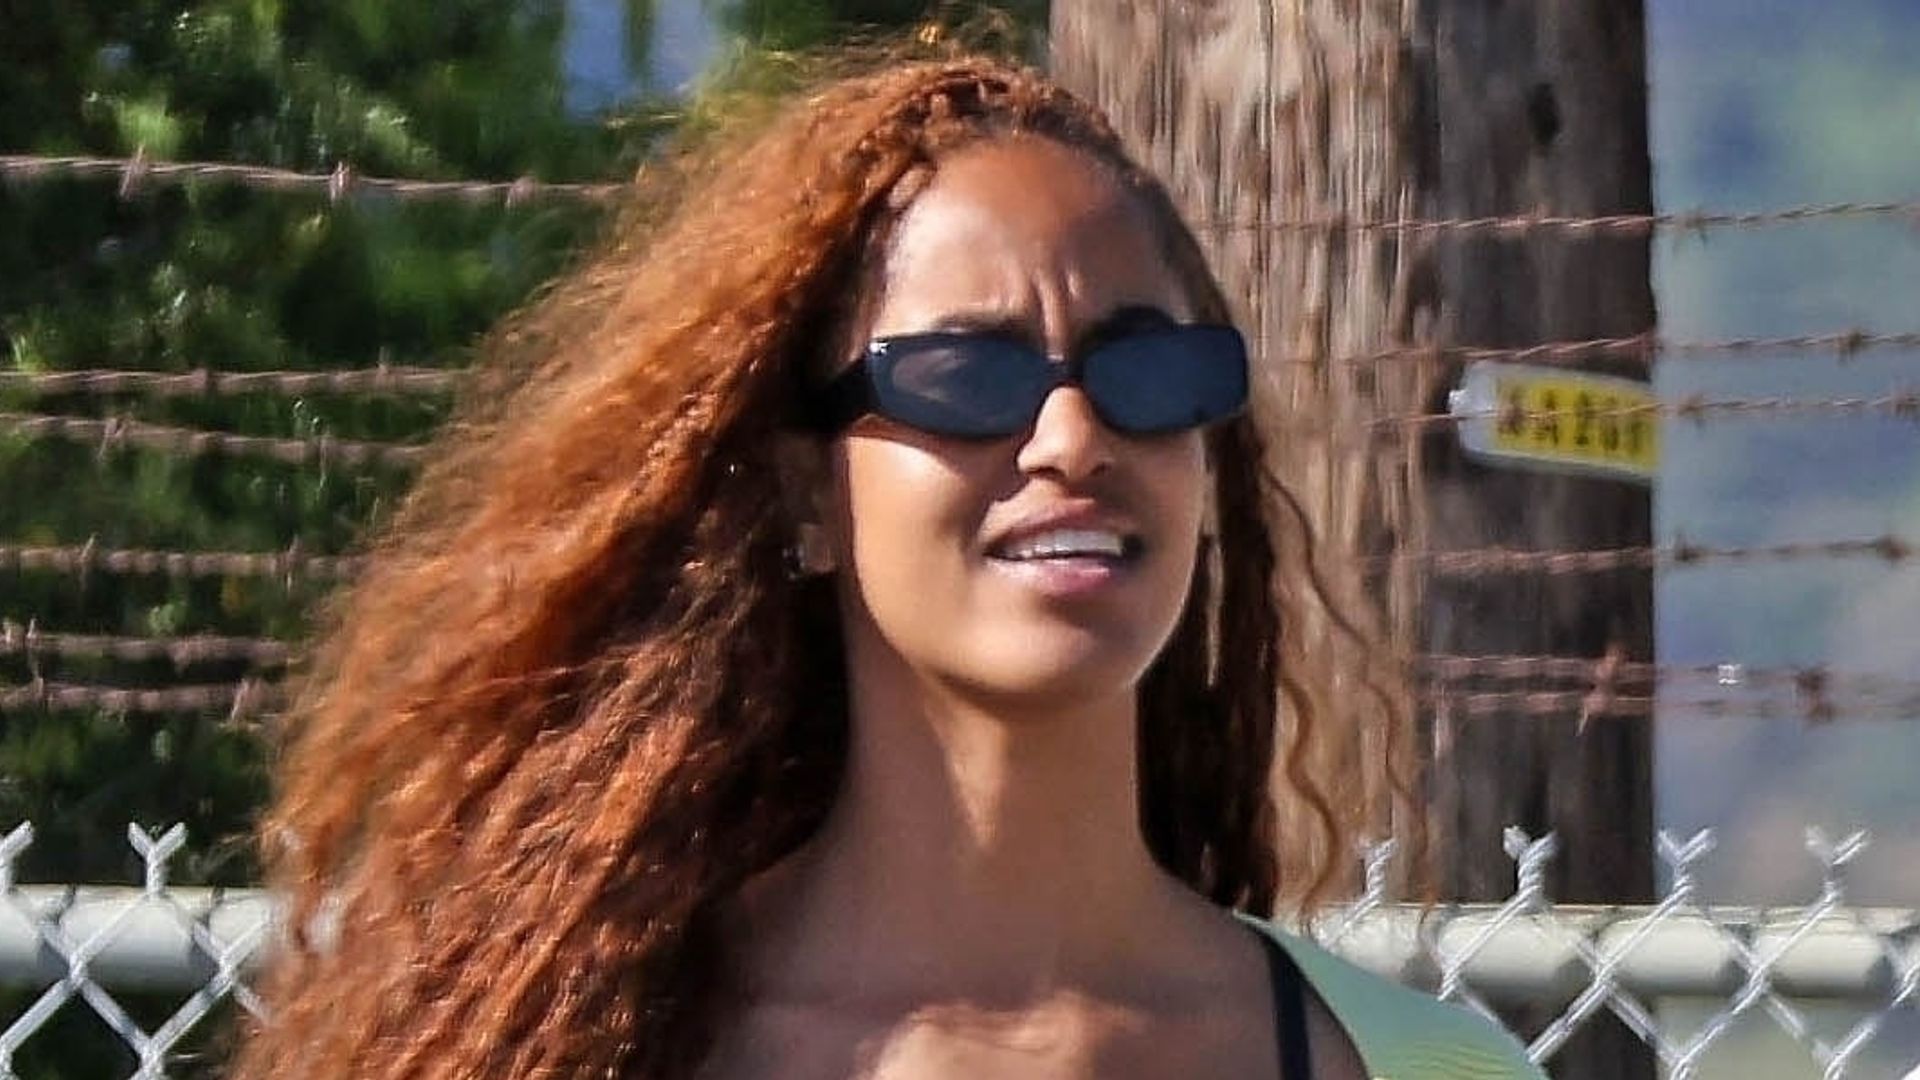 Malia Obama flaunts washboard abs and endless legs for hiking date in the Hollywood Hills